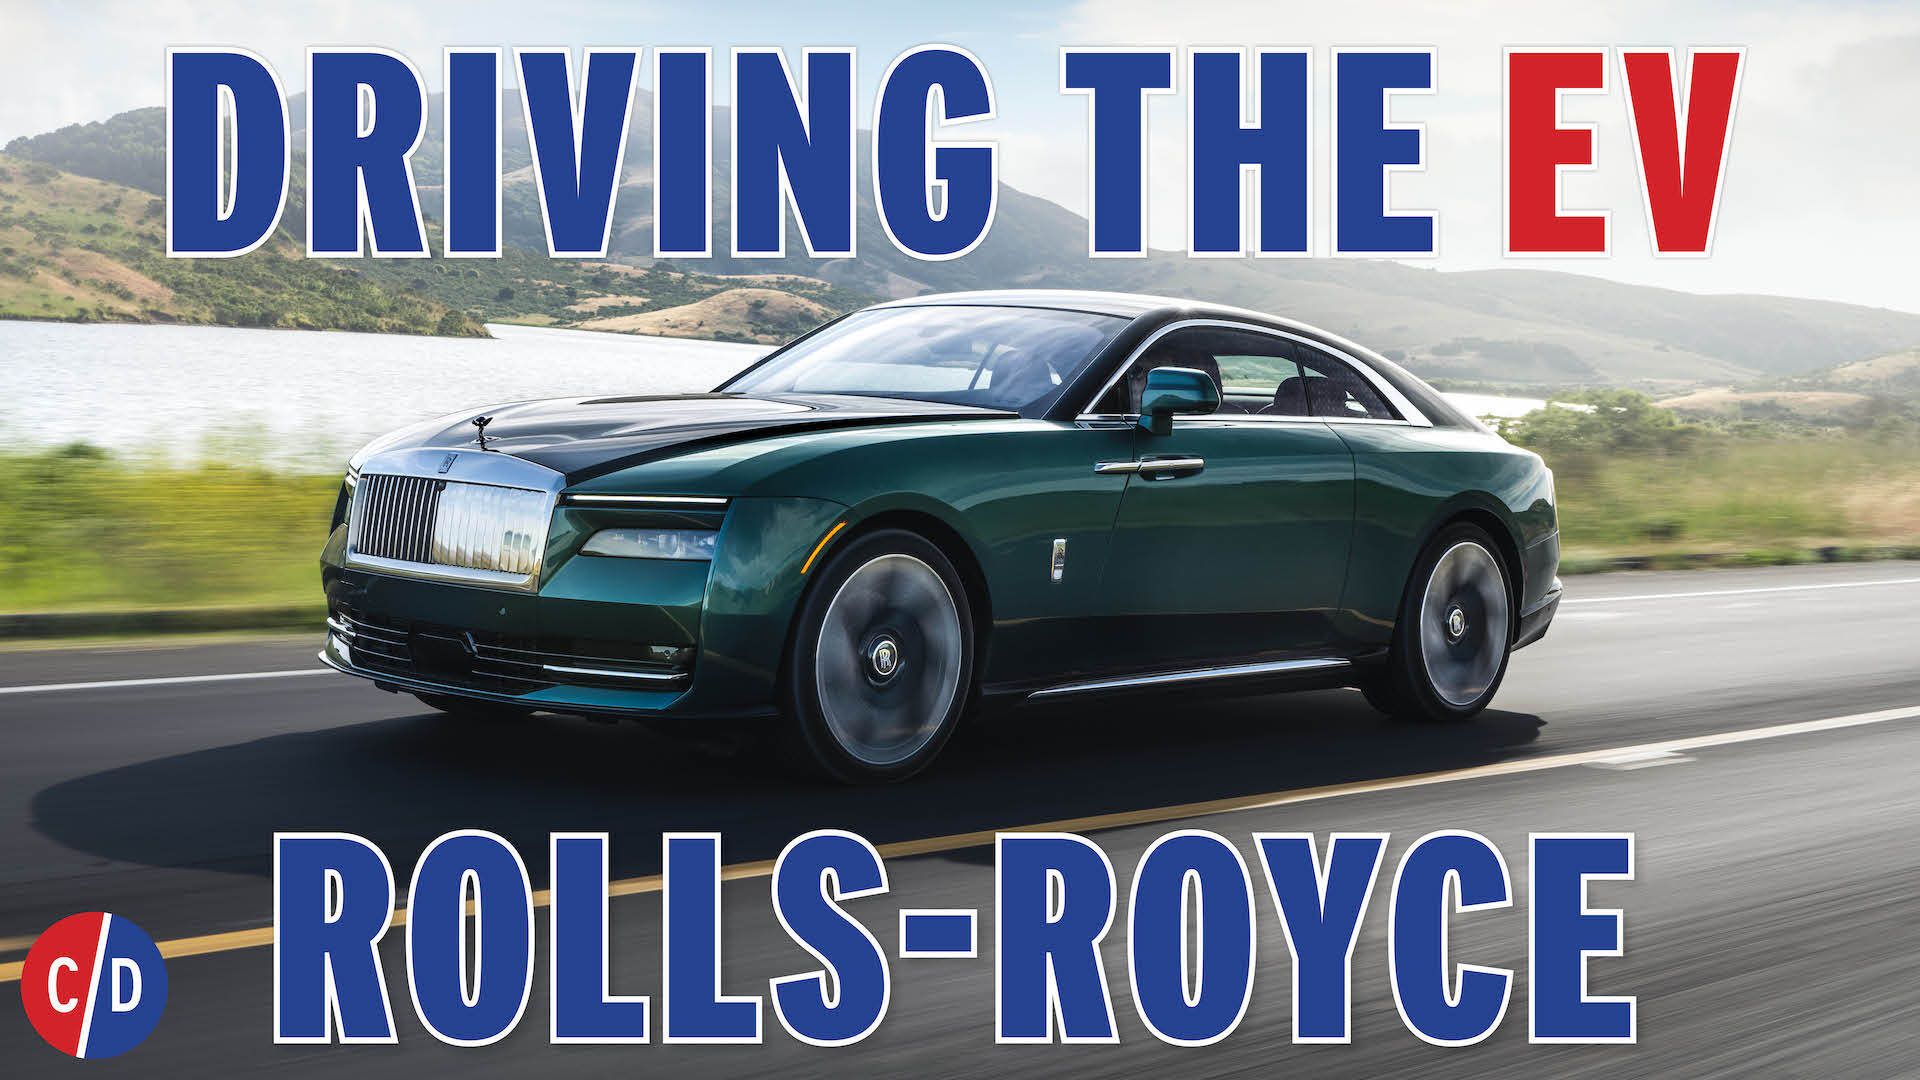 Rolls-Royce unveils Spectre: What to know about the $413,000 electric car -  ABC News